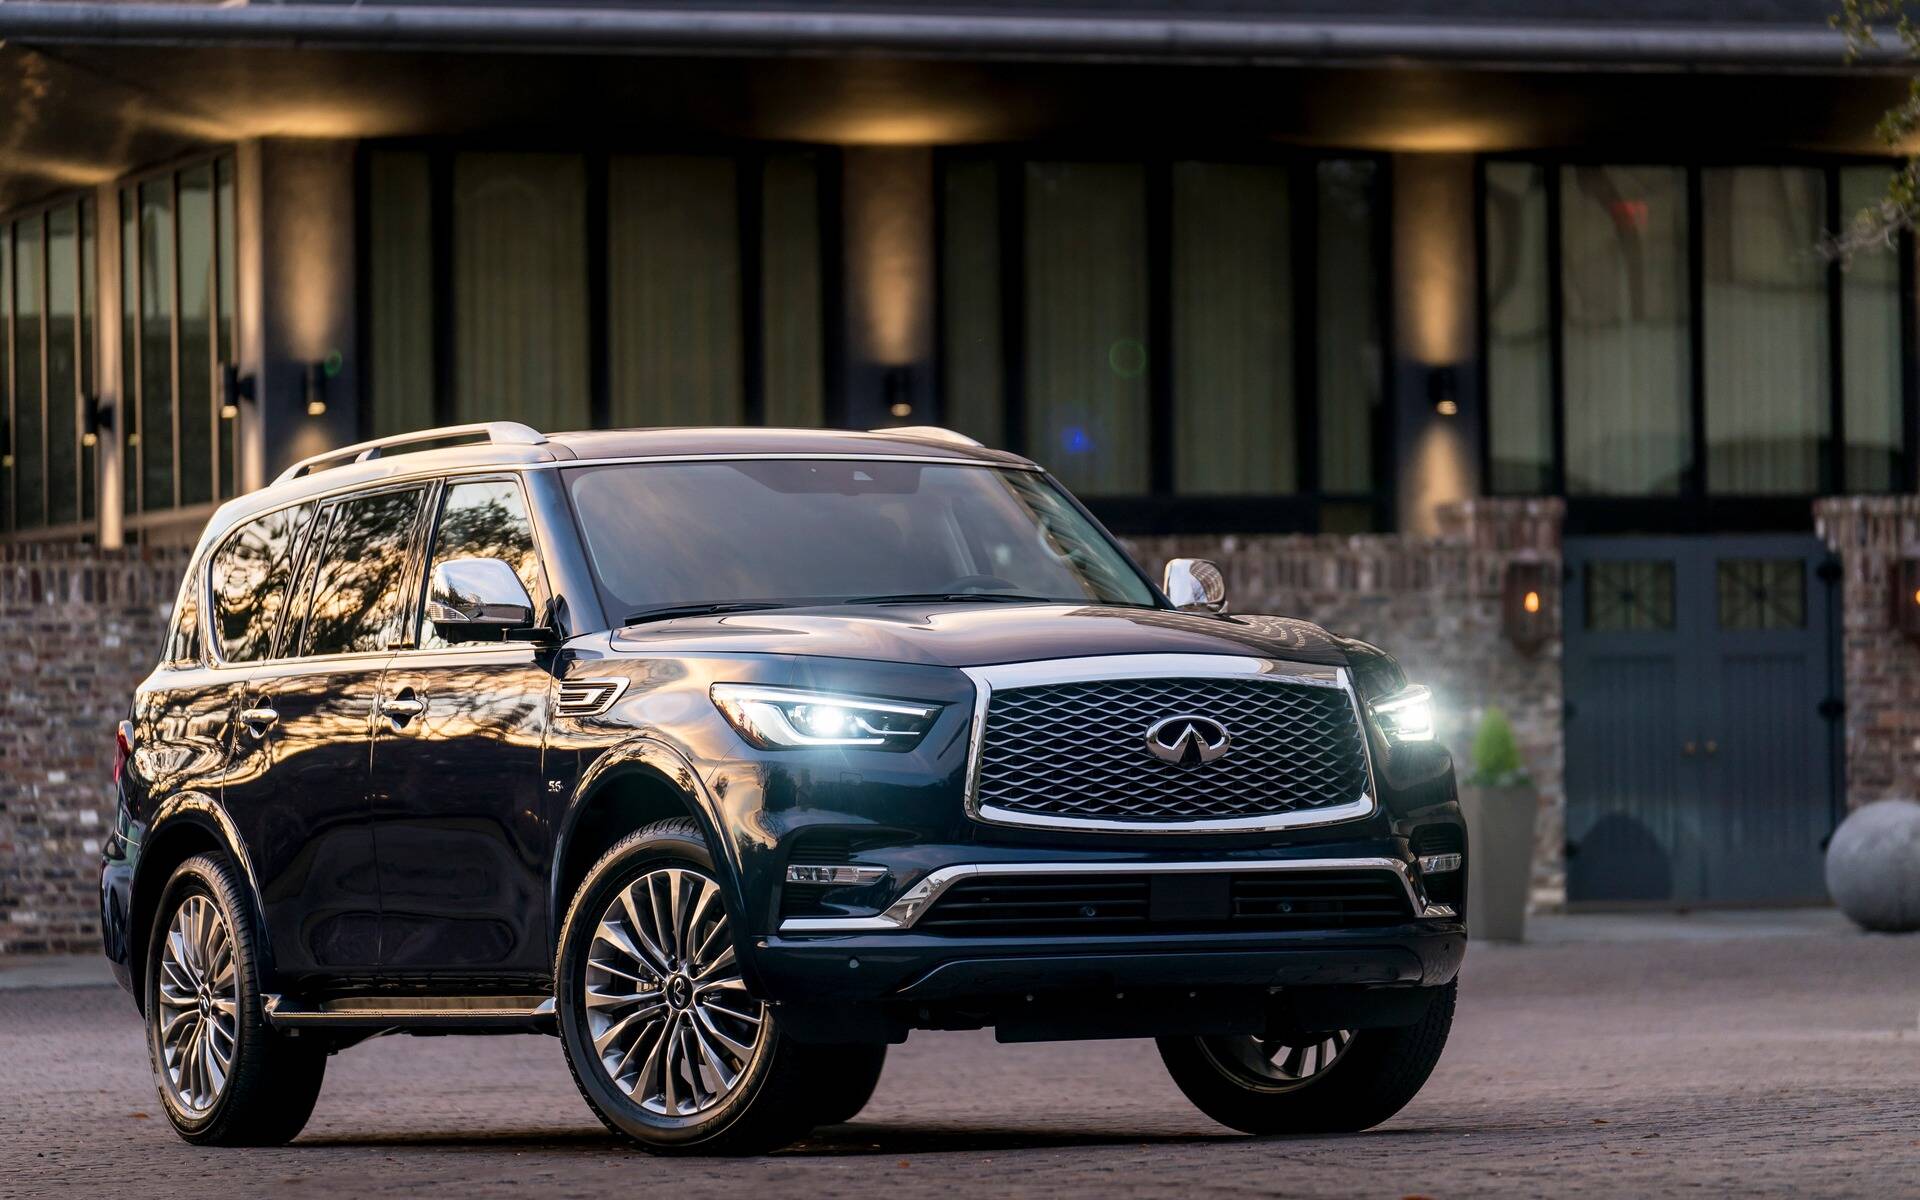 Well, that’s the tag line, the 2021 QX80 is a full size, V8 powered luxury ...